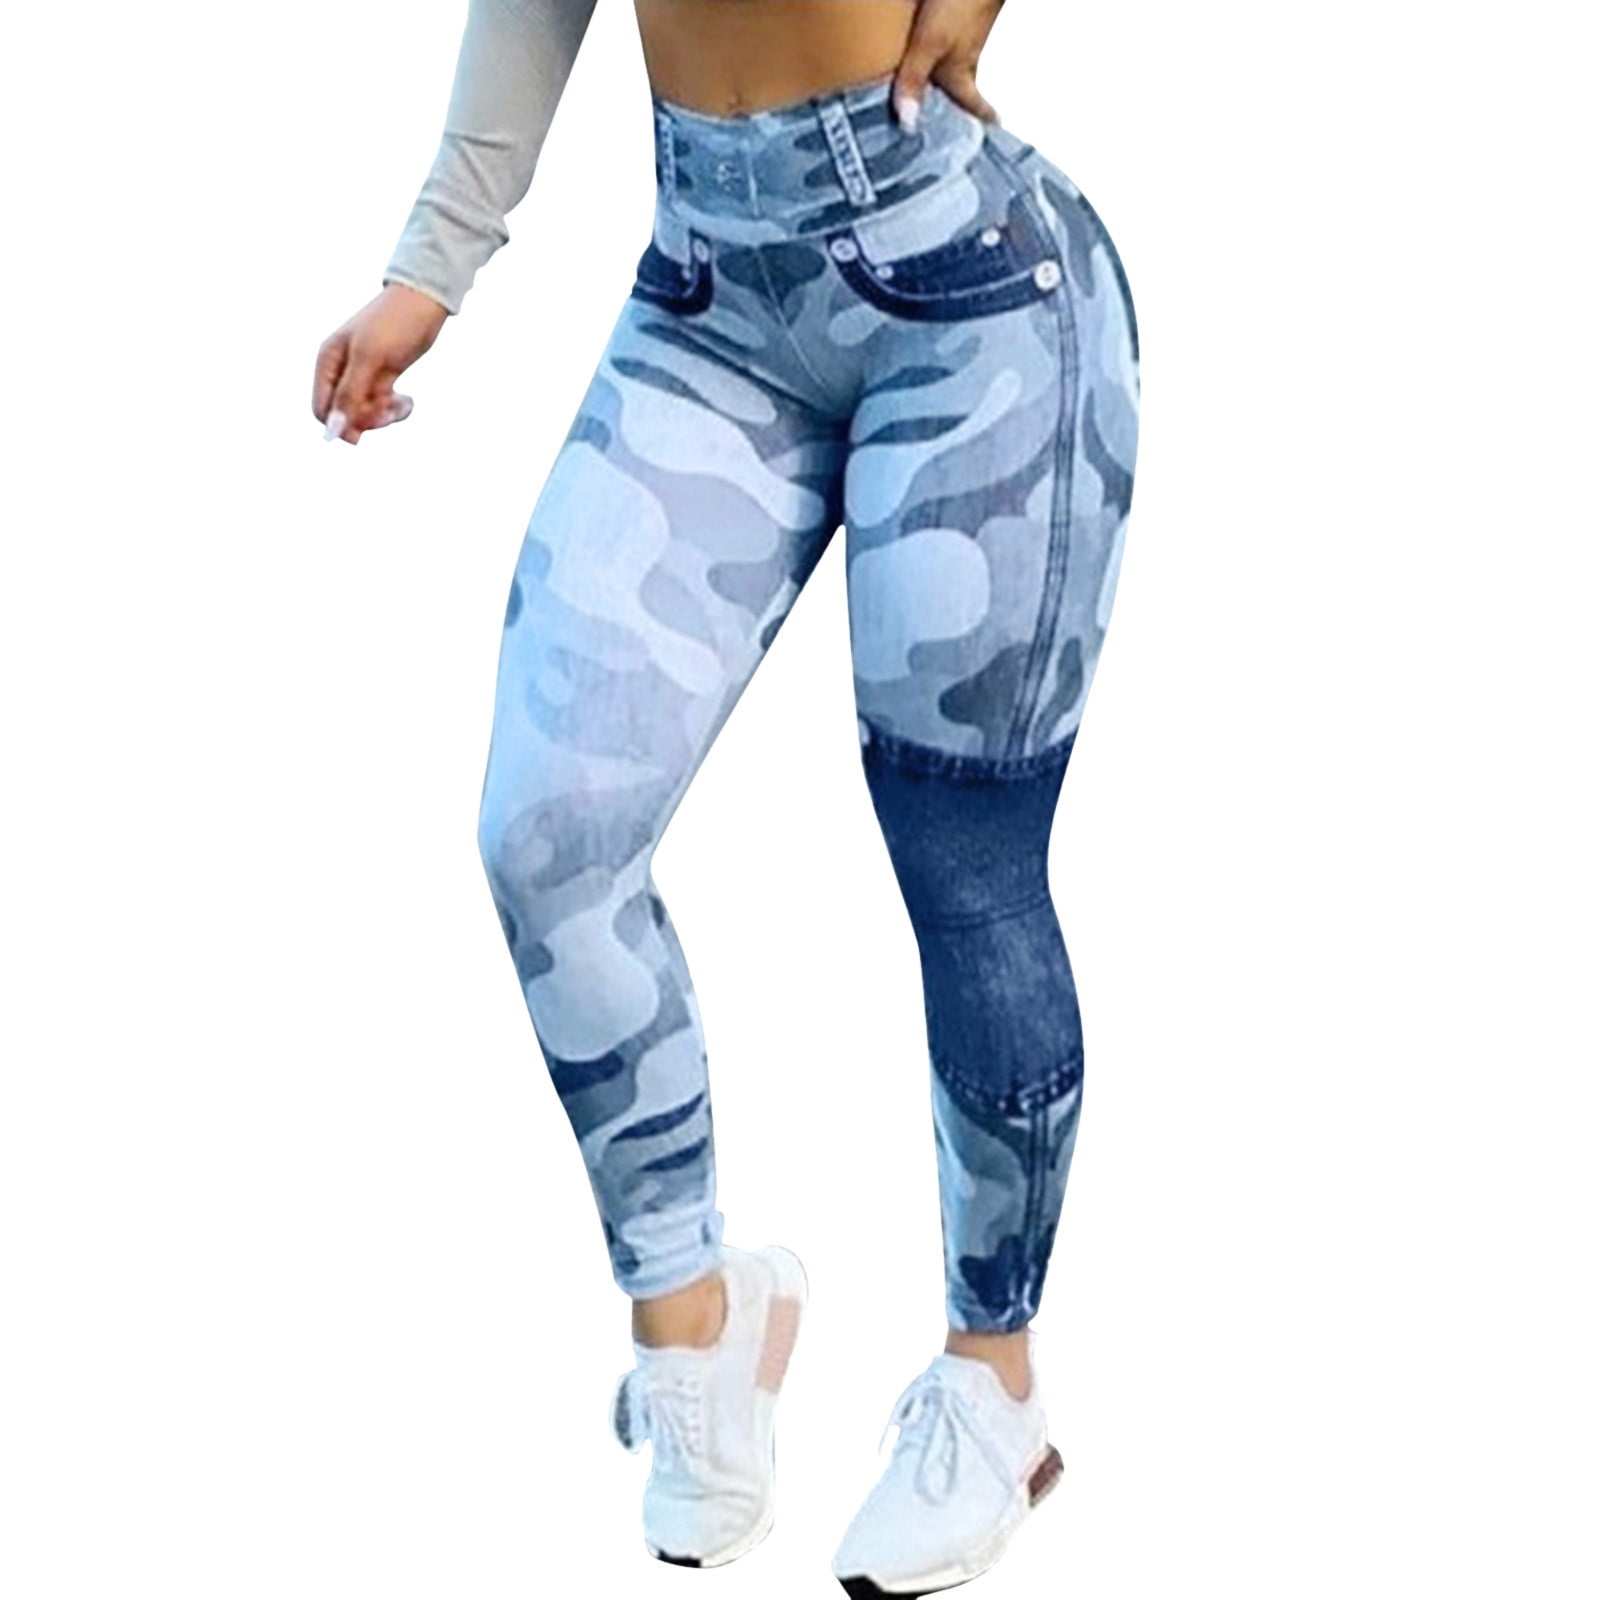 Women Button Fit Yoga Slim High Stitching Women Jeans fvwitlyh Clothes Casual Waist Shorts 80s Leggings Camouflage